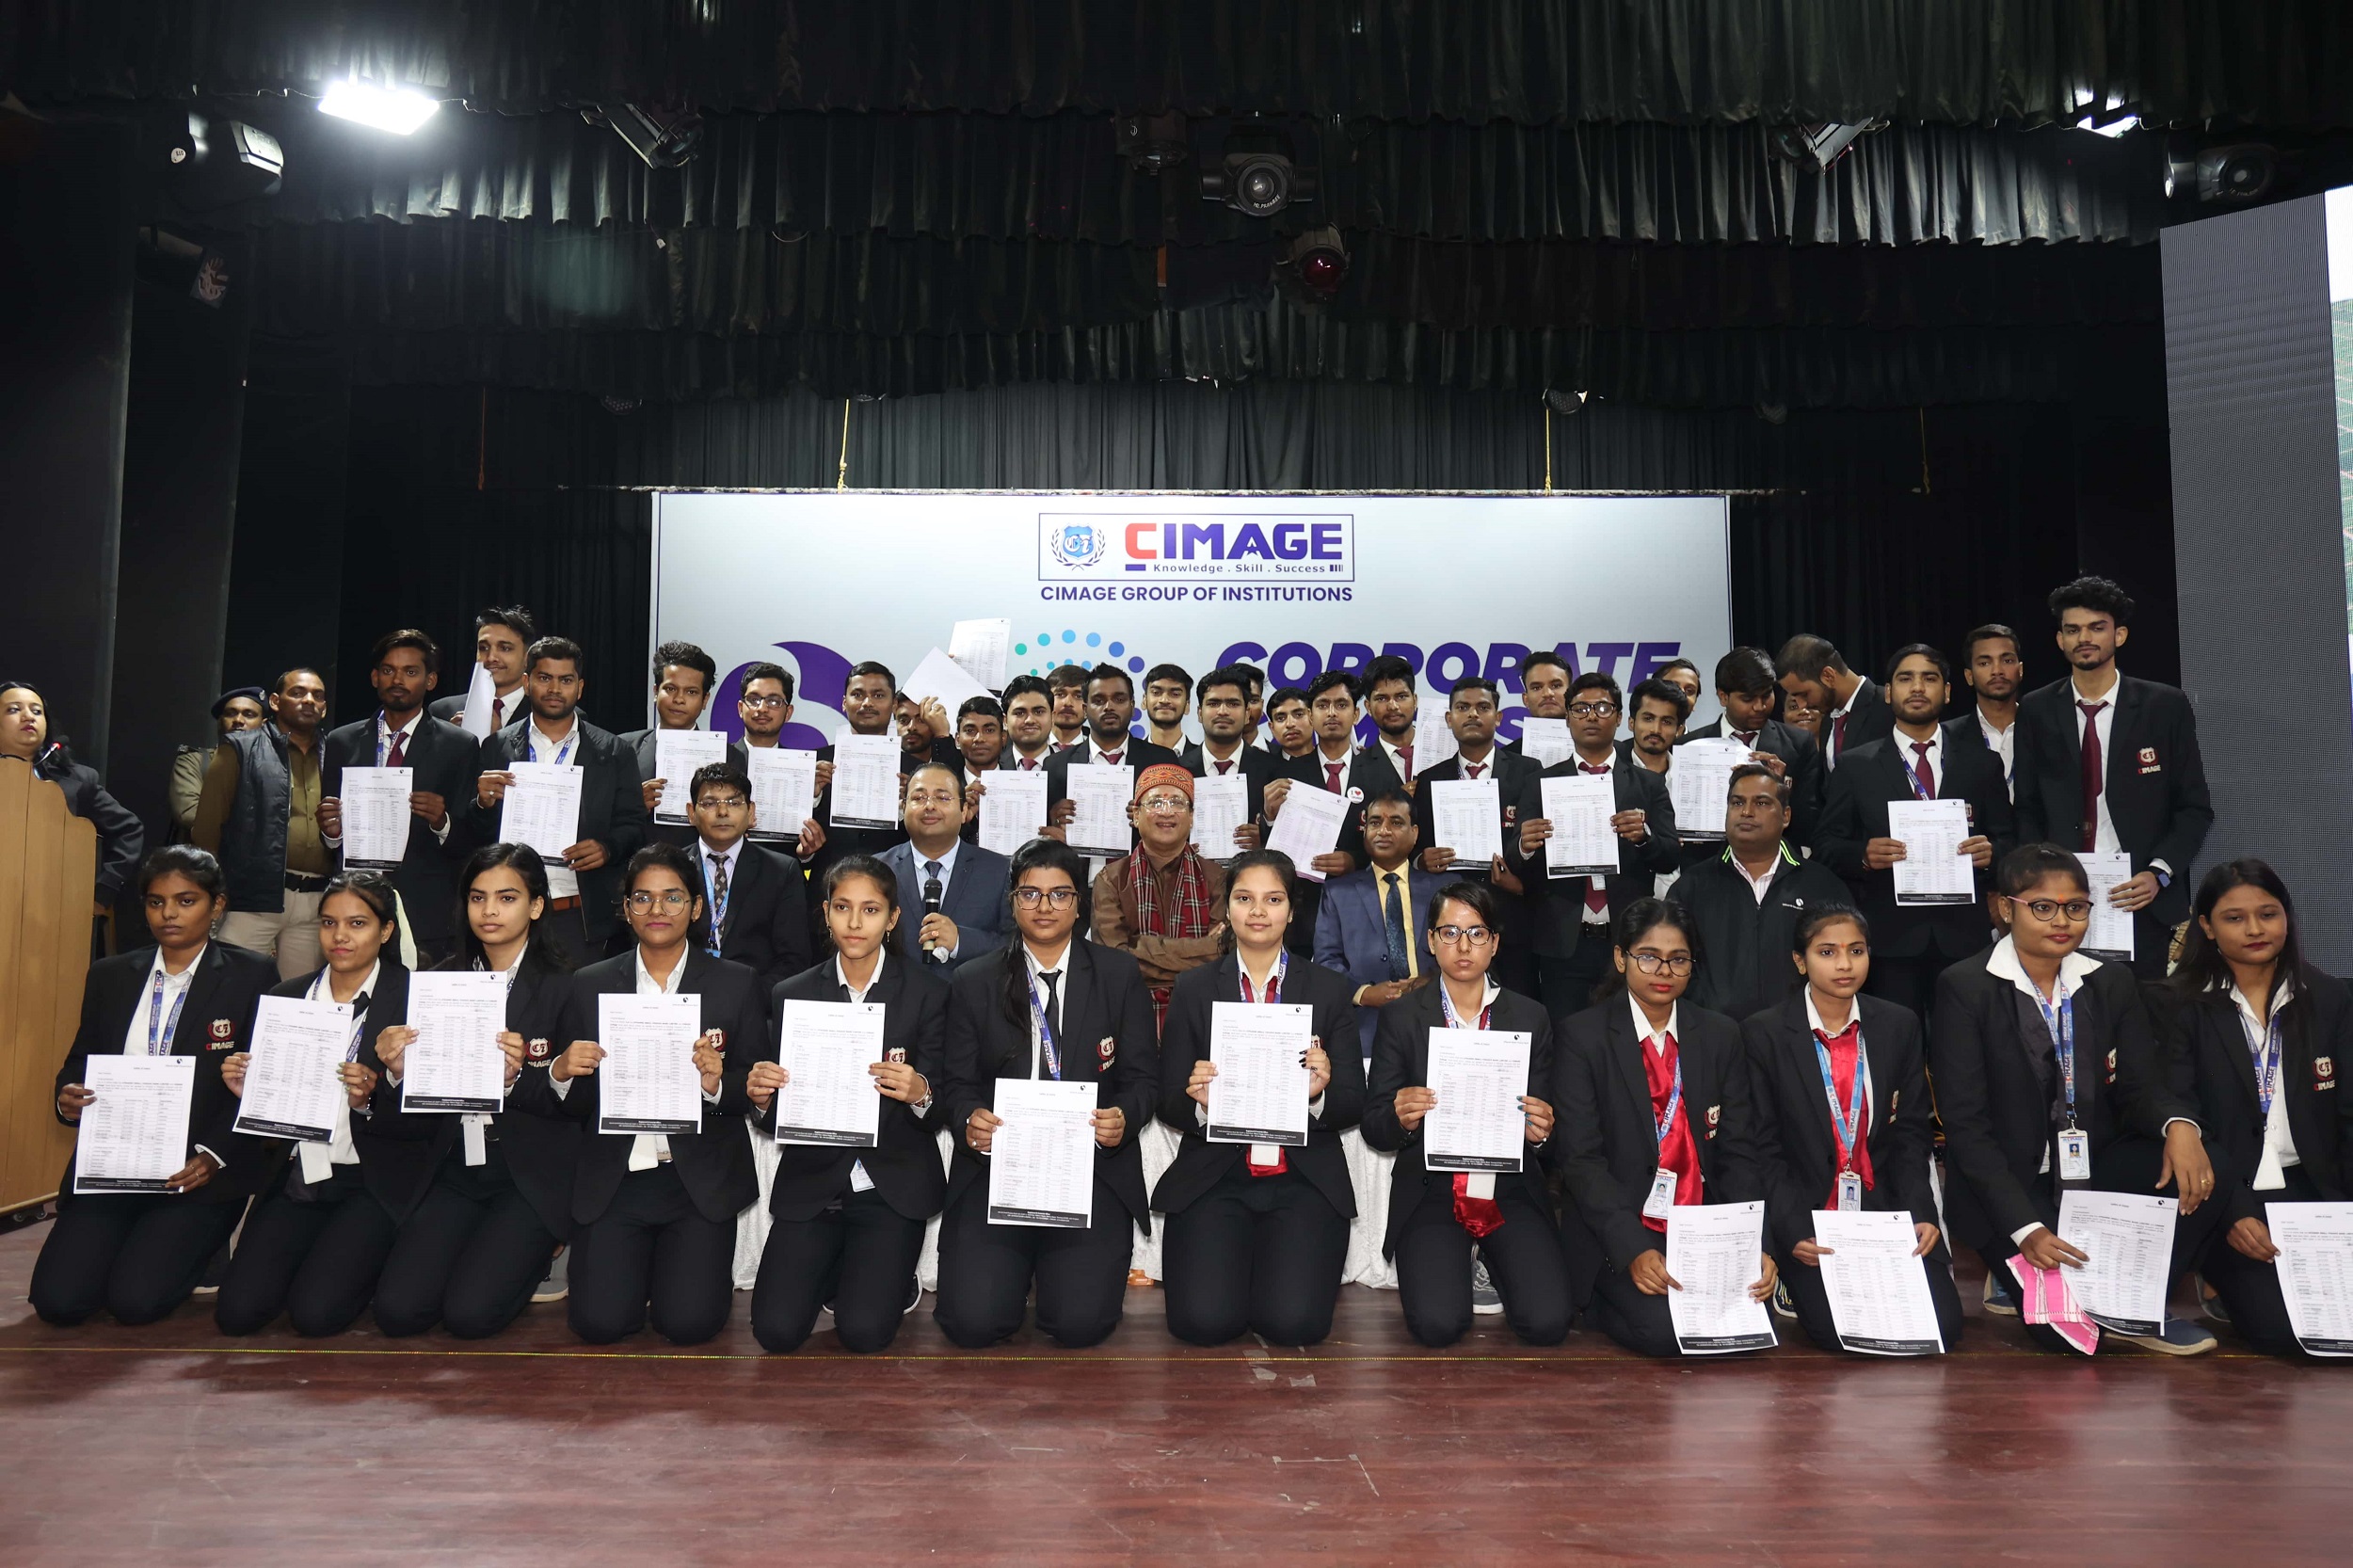 41 Students of CIMAGE were placed in Utkarsh Small Finance Bank | CIMAGE College Organizes Corporate Campus Connect>